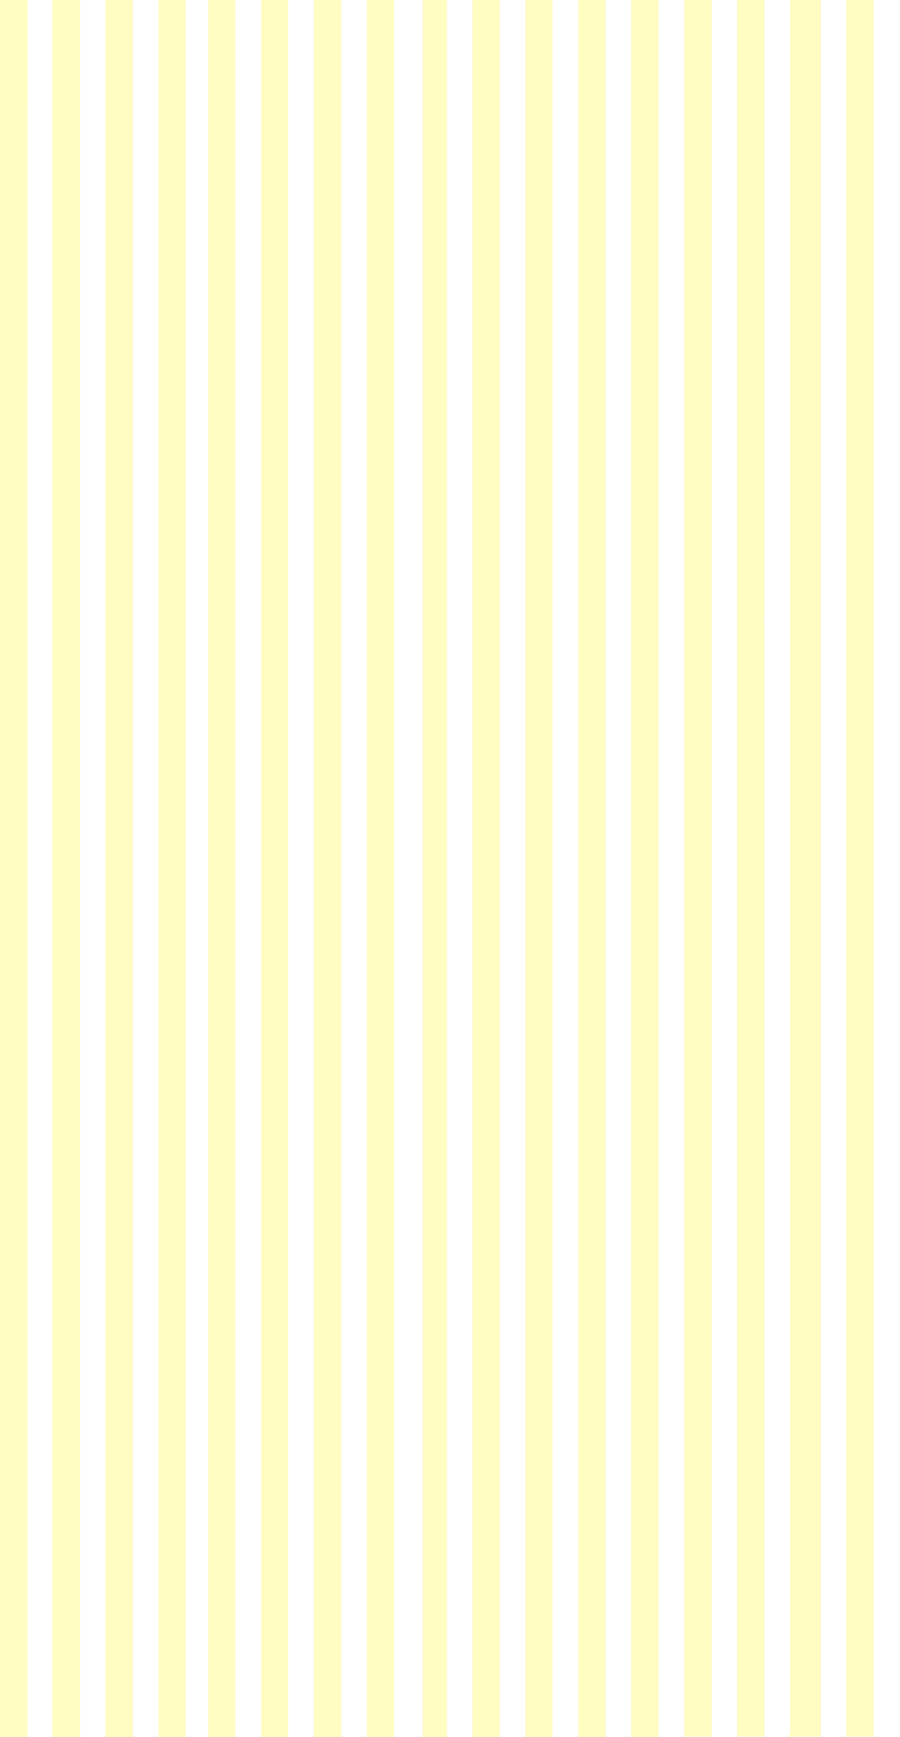 Pastel Yellow Phone Wallpapers Wallpaper Cave Download, share or upload your own one! pastel yellow phone wallpapers